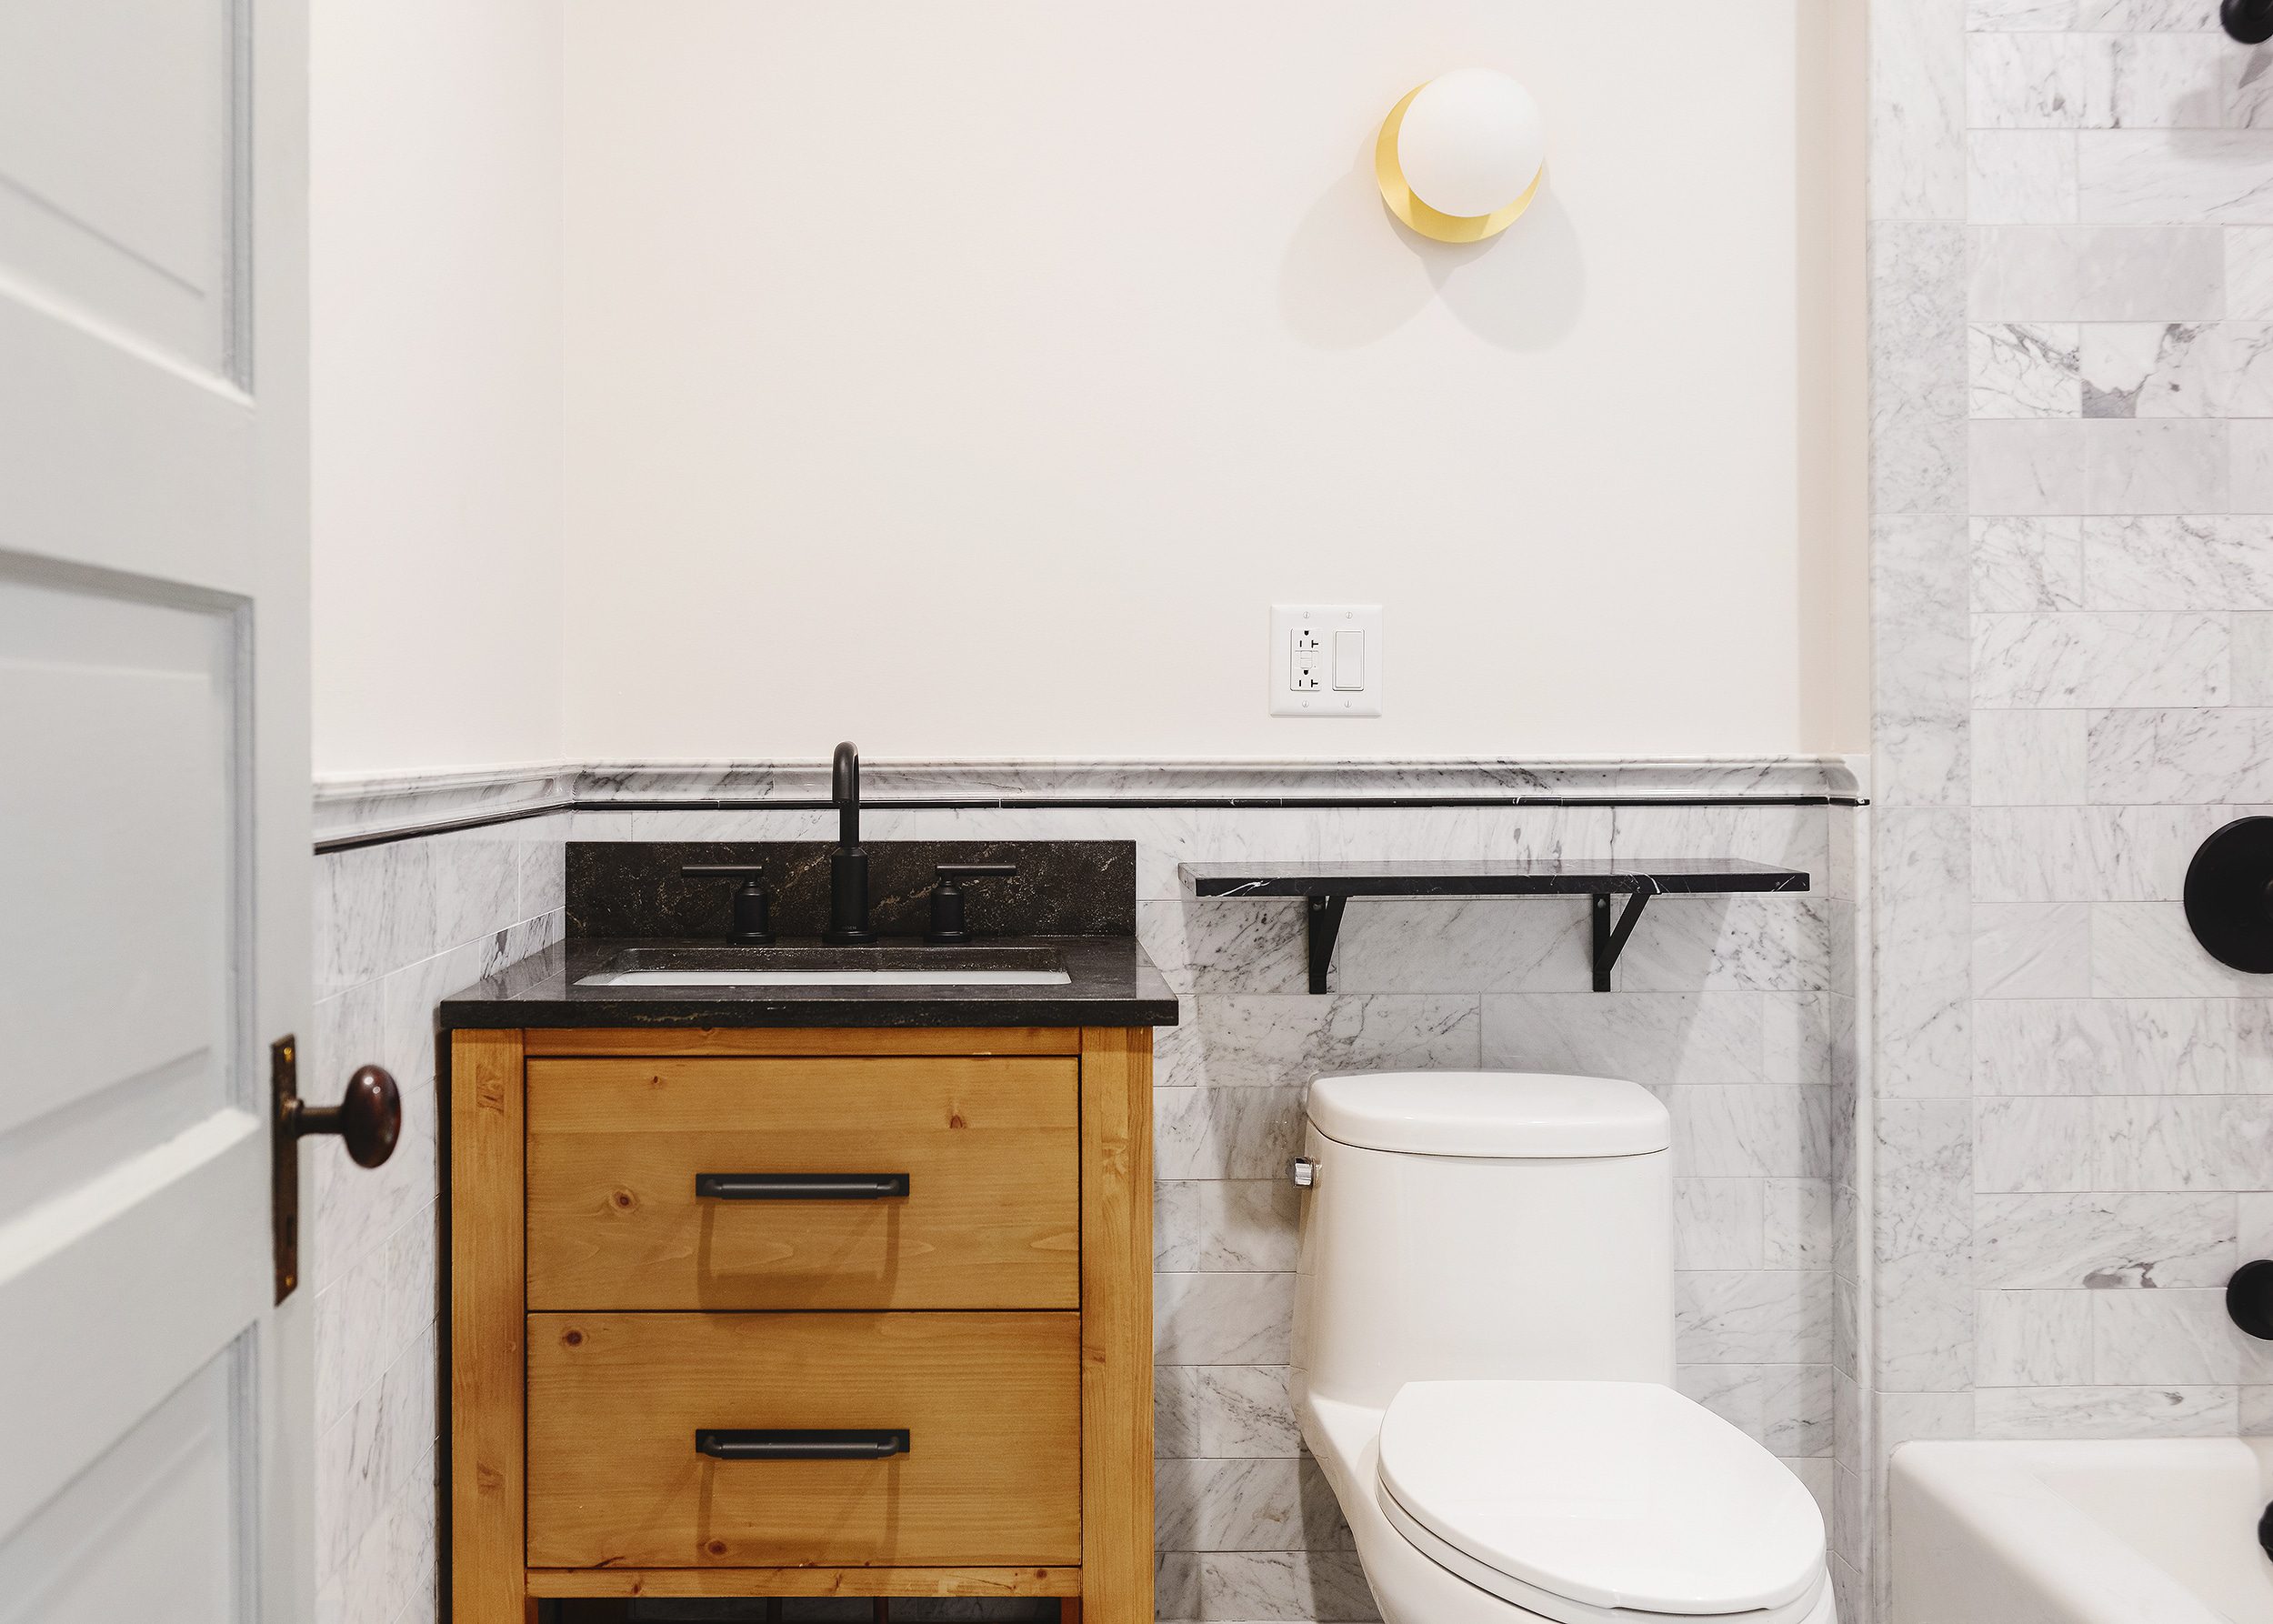 Our marble bathroom before the finishing touches | via Yellow Brick Home